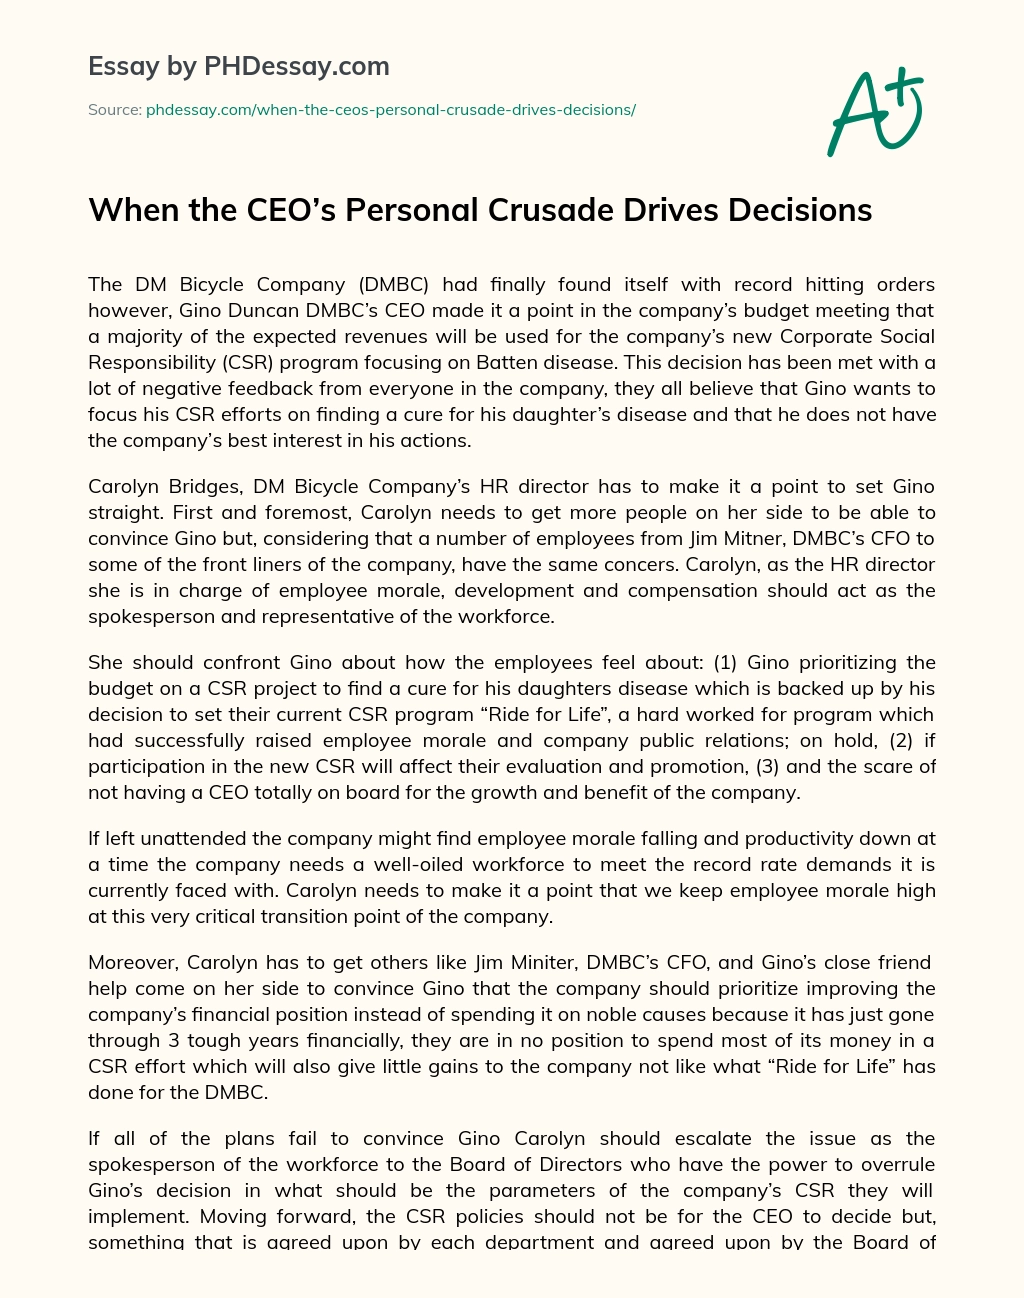 When the CEO’s Personal Crusade Drives Decisions essay